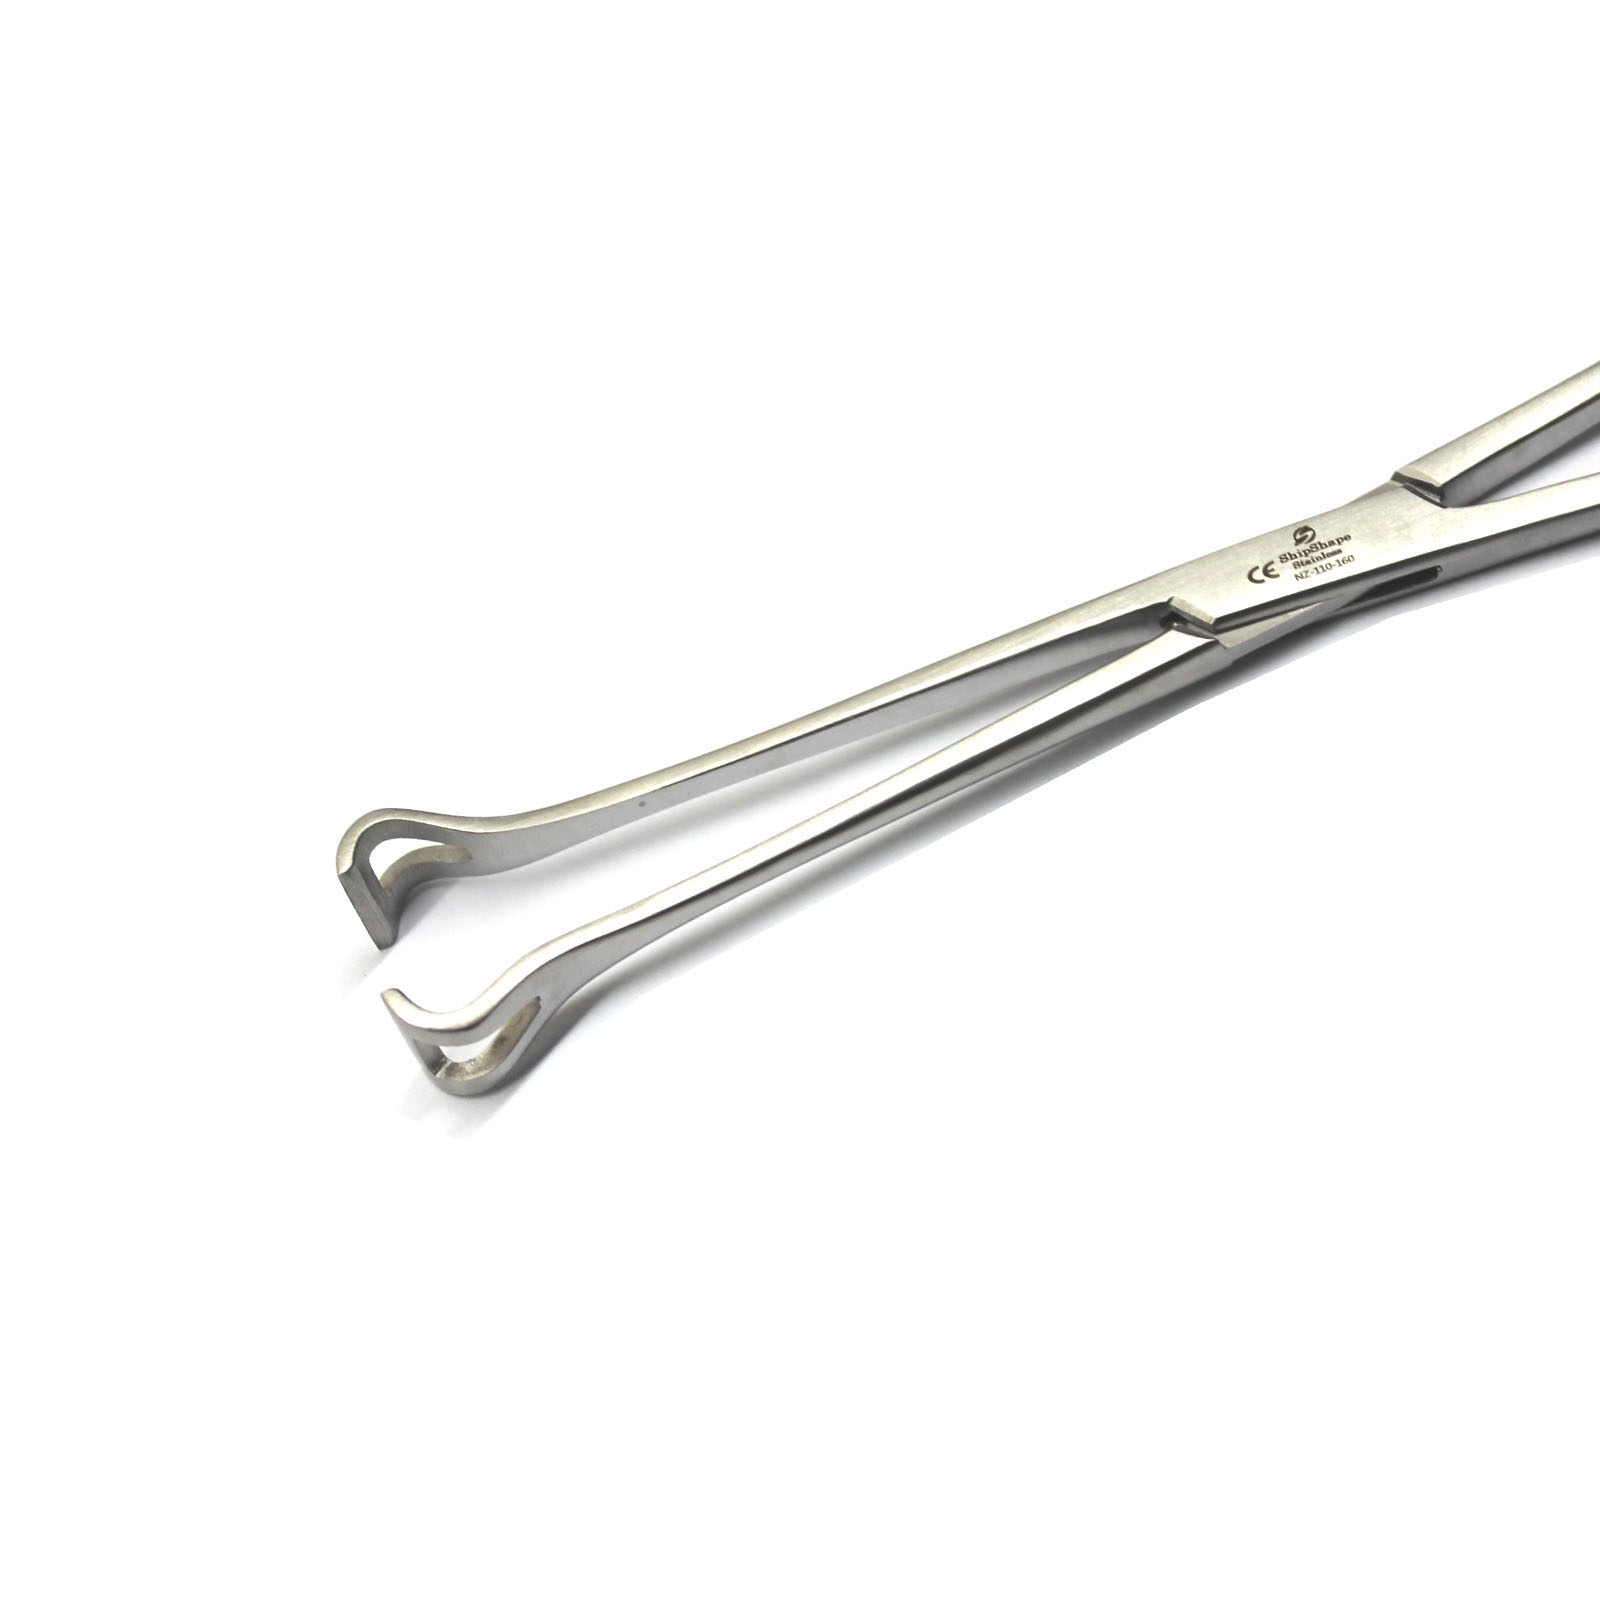 Babcock Forceps 10" Grasp Delicate Tissue Veterinary Surgical Instruments -275